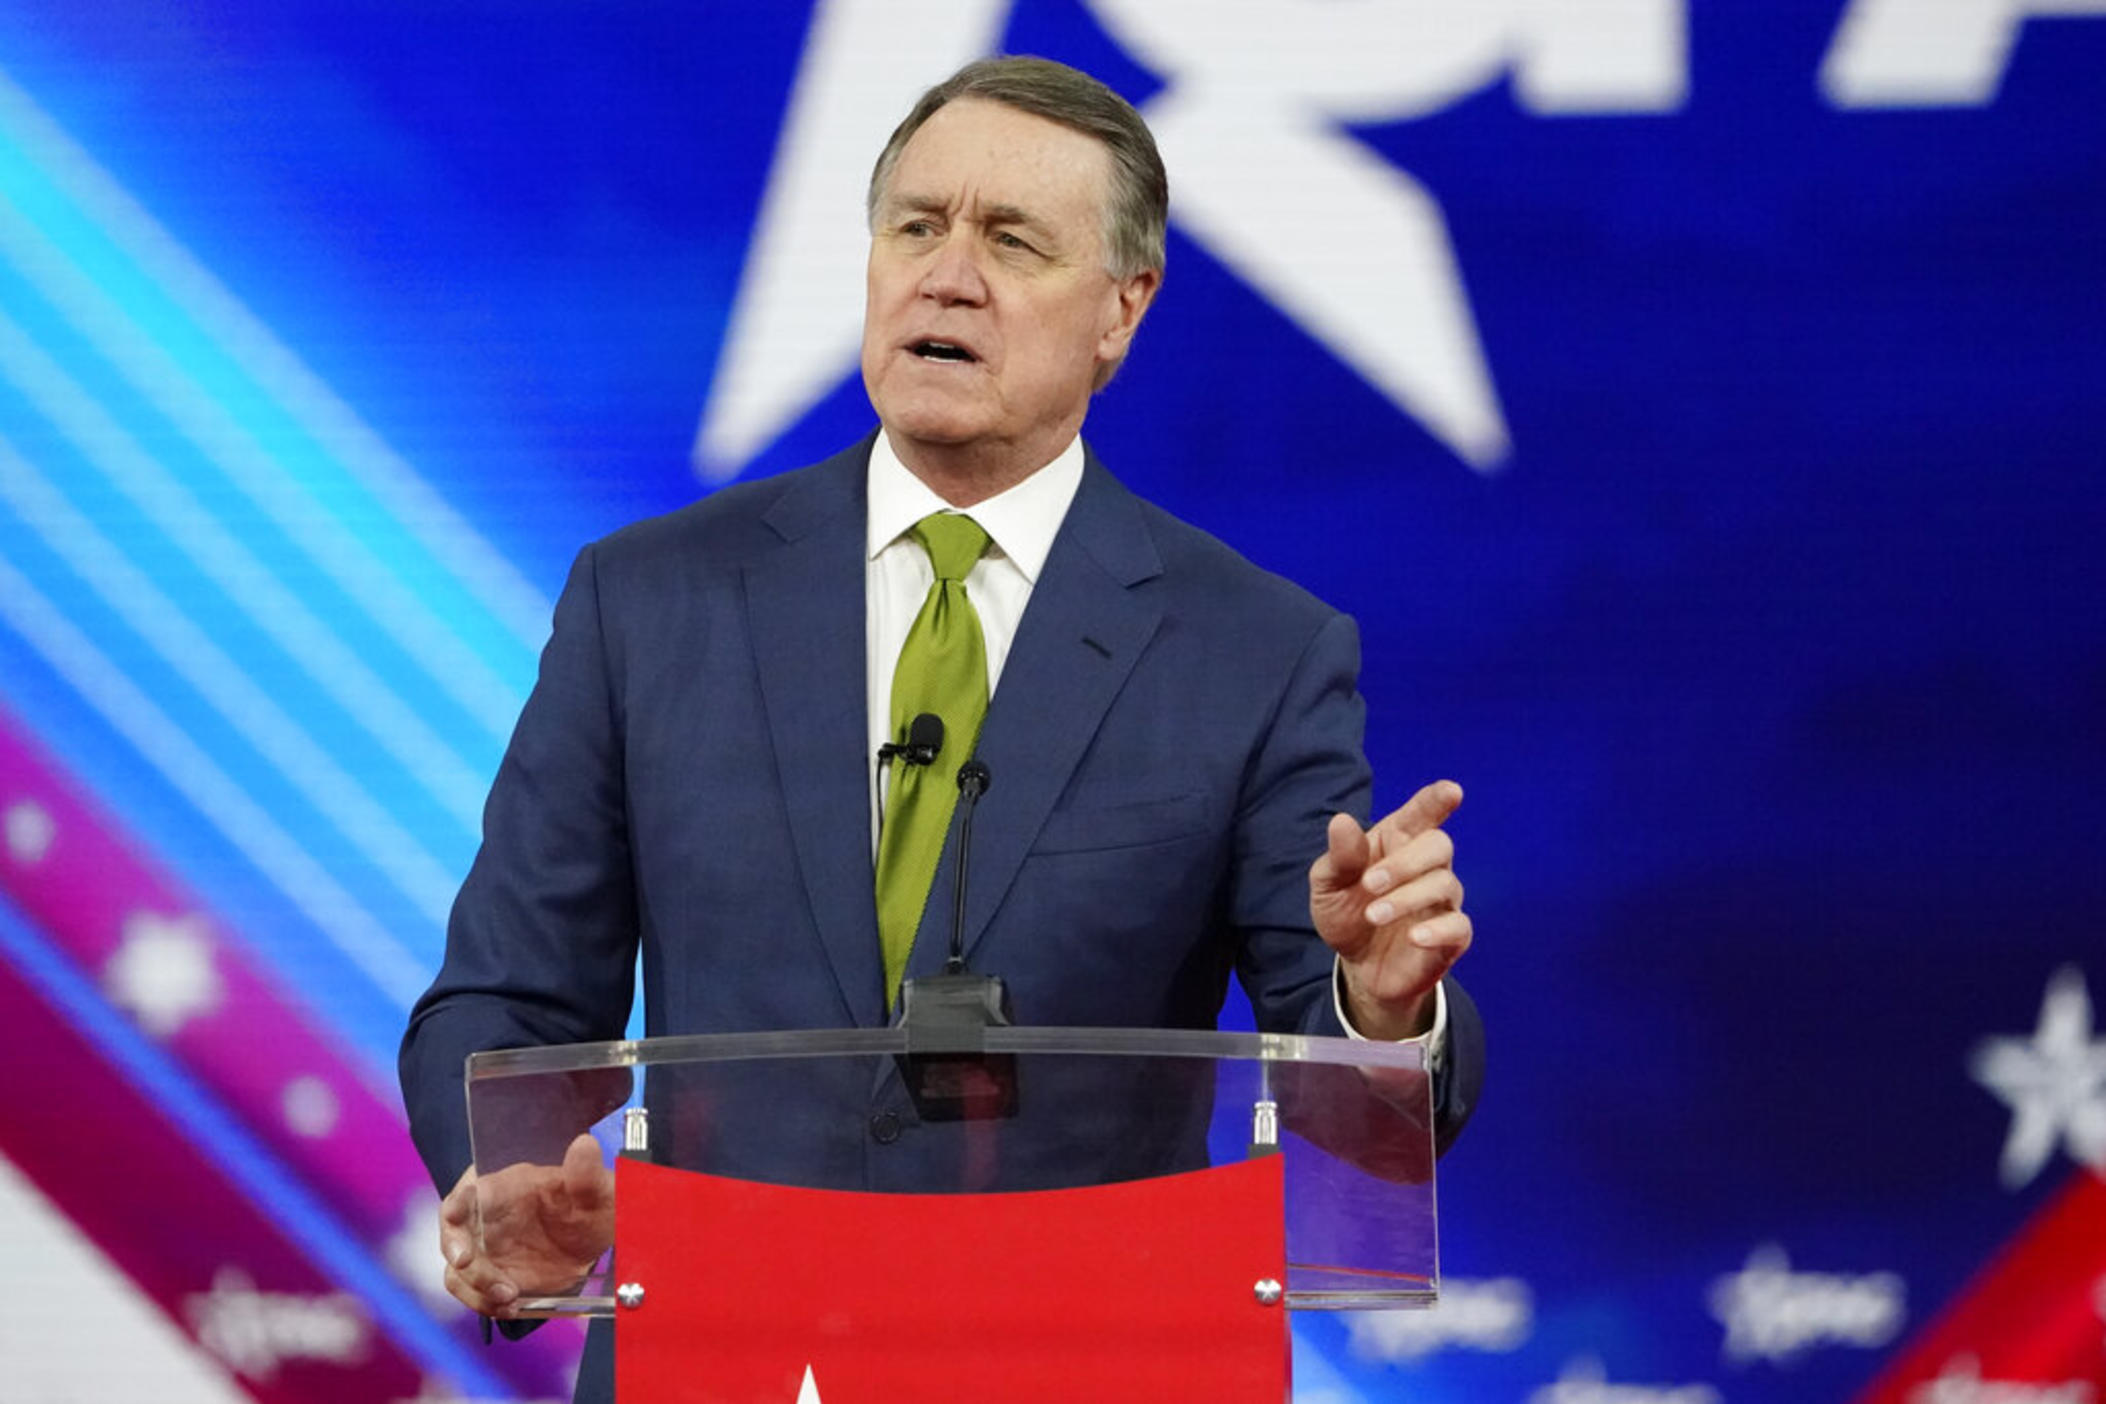 Former Sen. David Perdue R-Ga., speaks at the Conservative Political Action Conference (CPAC) Sunday, Feb. 27, 2022, in Orlando, Fla. A planned $5 billion electric vehicle plant that has been billed as the largest economic development project in Georgia’s history is drawing opposition from an unusual source: former Republican U.S. senator Perdue. A former corporate executive, Perdue is looking to unseat Georgia Gov. Brian Kemp, a fellow Republican, in this year’s gubernatorial race.